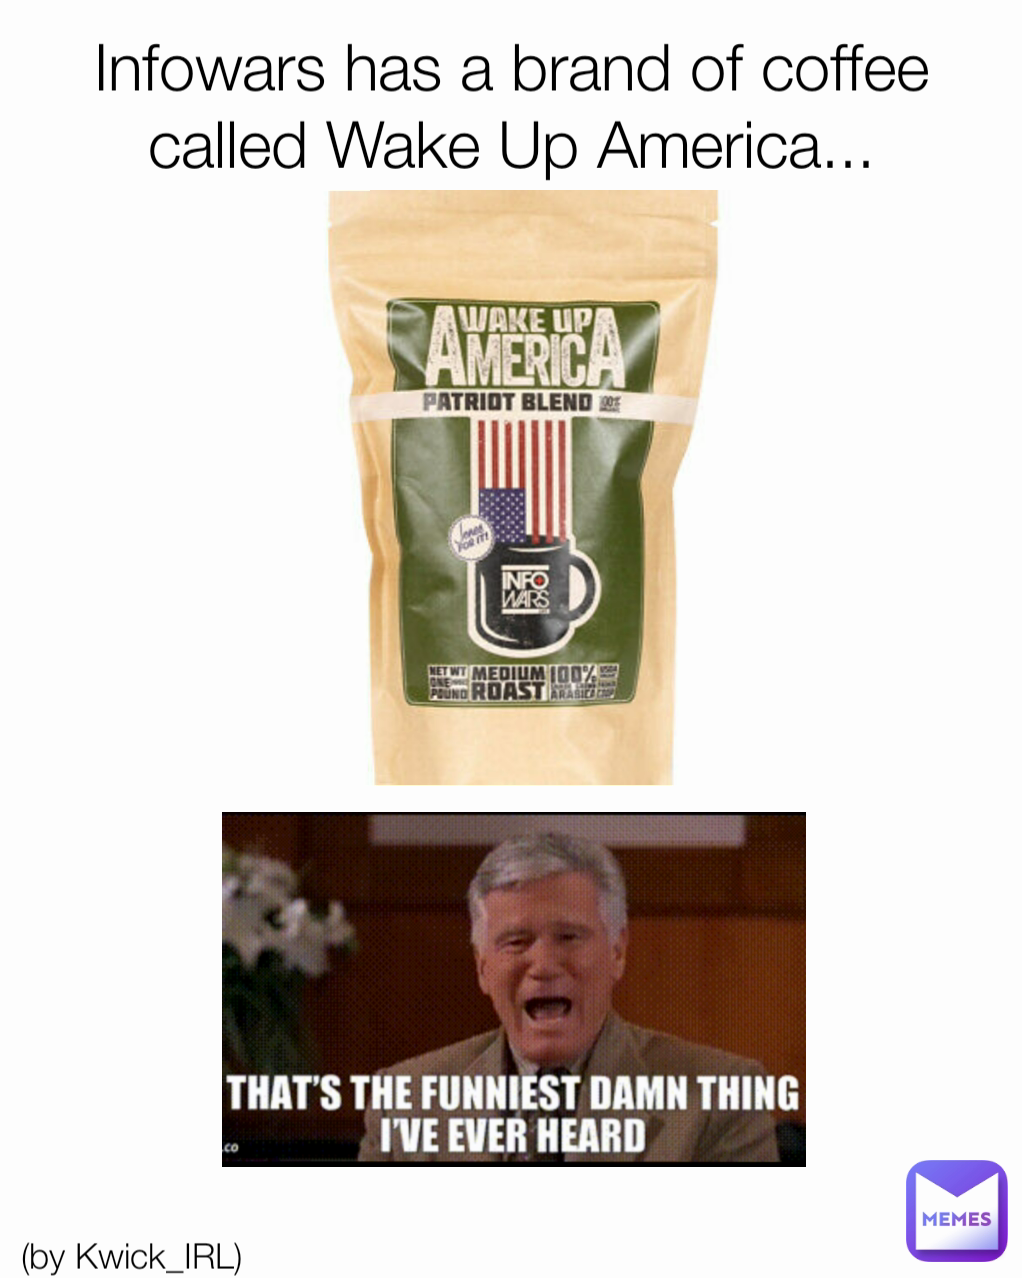 Infowars has a brand of coffee called Wake Up America... (by Kwick_IRL)